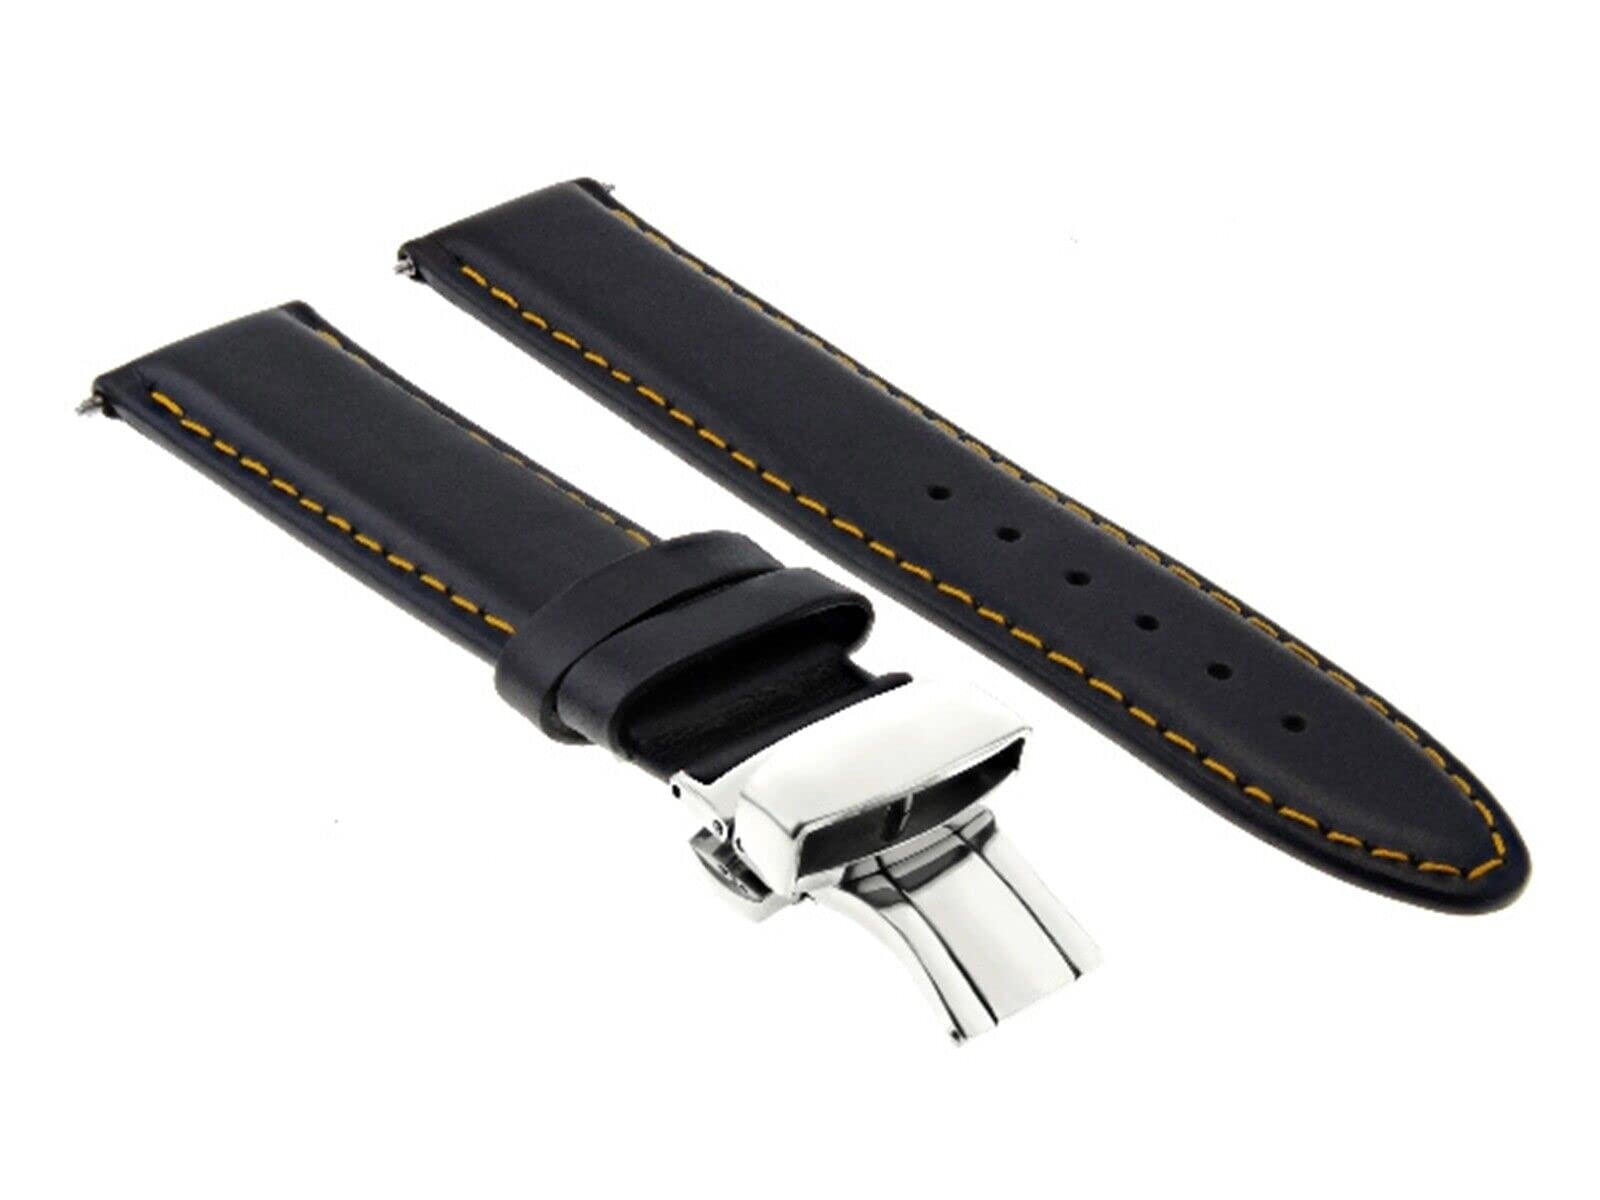 Ewatchparts 20MM SMOOTH LEATHER BAND STRAP DEPLOYMENT BRACELET BUCKLE CLASP COMPATIBLE WITH TUDOR BLACK